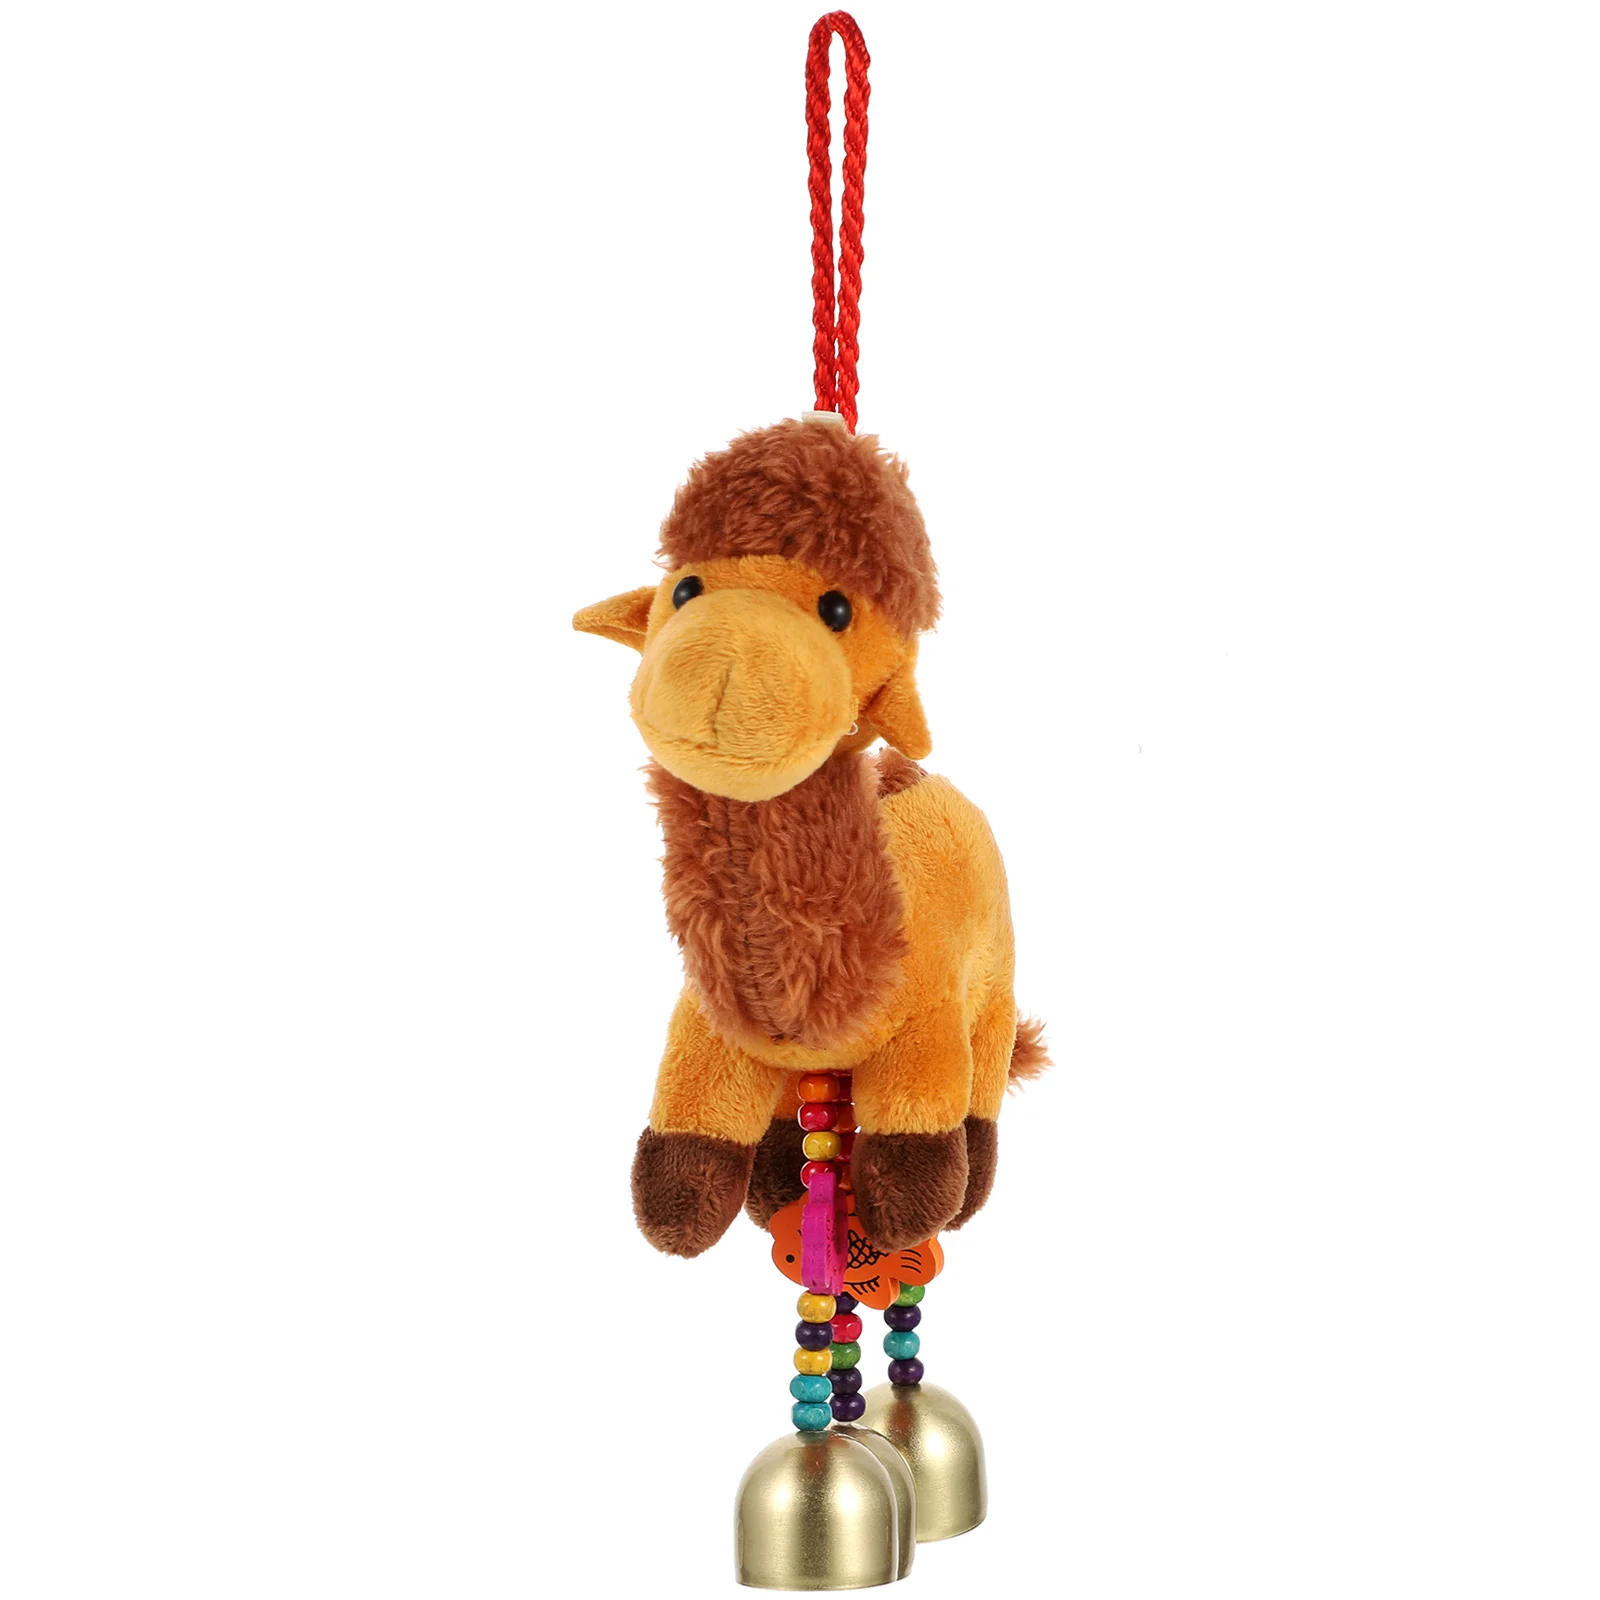 Camel Child Toys Keyring Bag Pendant Mini Kids Party Favors Metal Plush Keychains Aesthetic Childrens 3 pcs bowling keychain match keychains gift party decorations during badminton simulated zinc alloy pendants